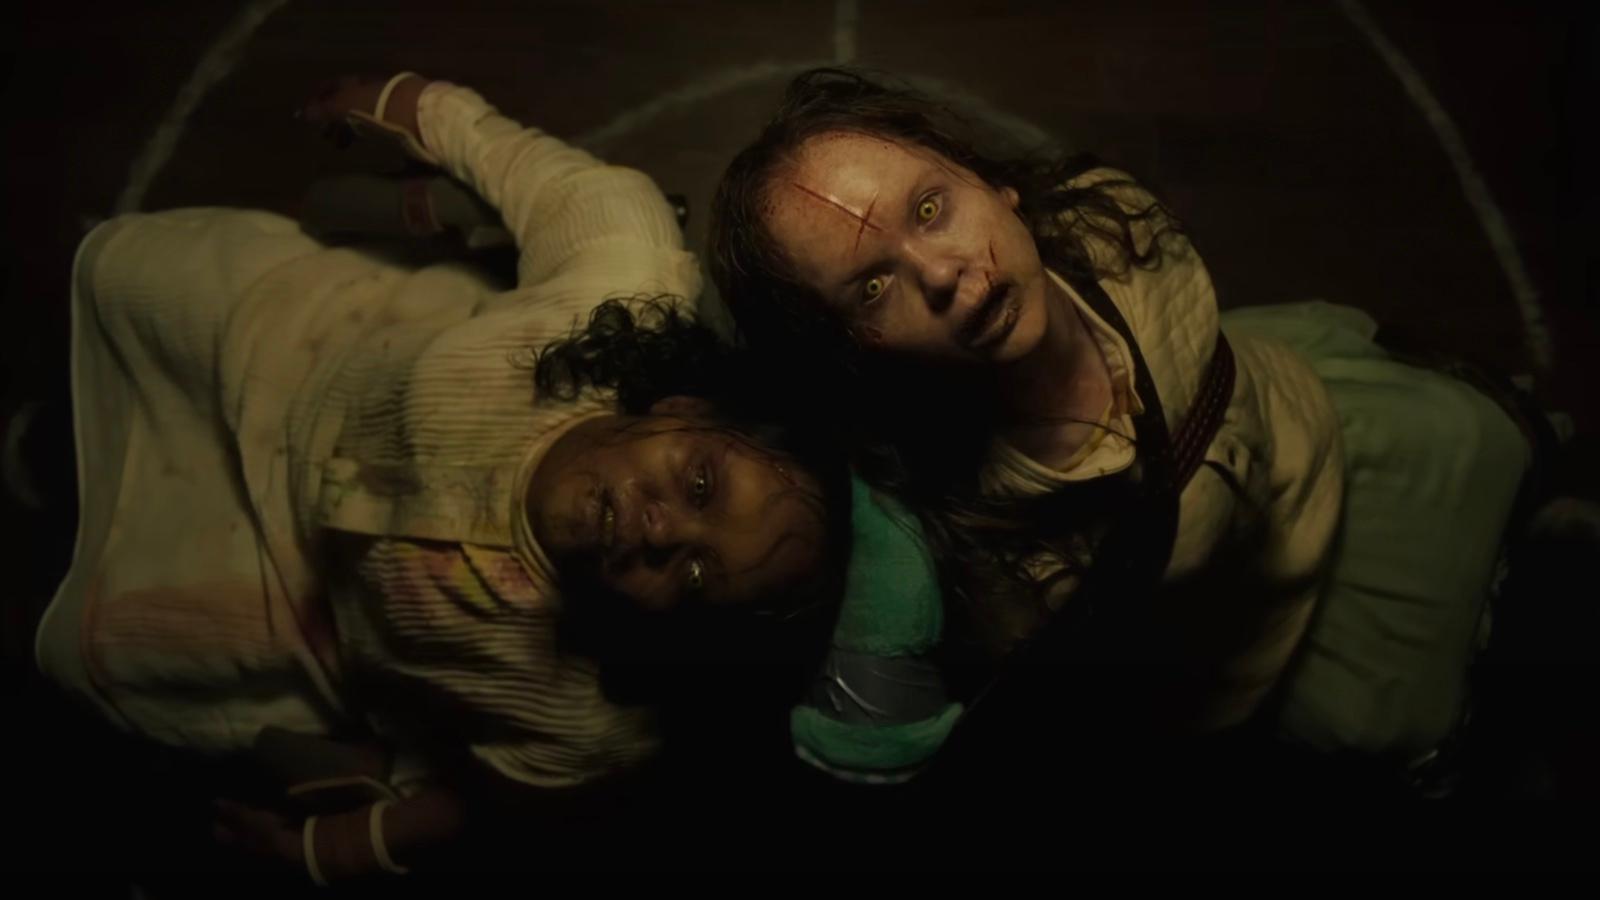 Lidya Jewett and Olivia O'Neill as Angela and Katherine in The Exorcist: Believer